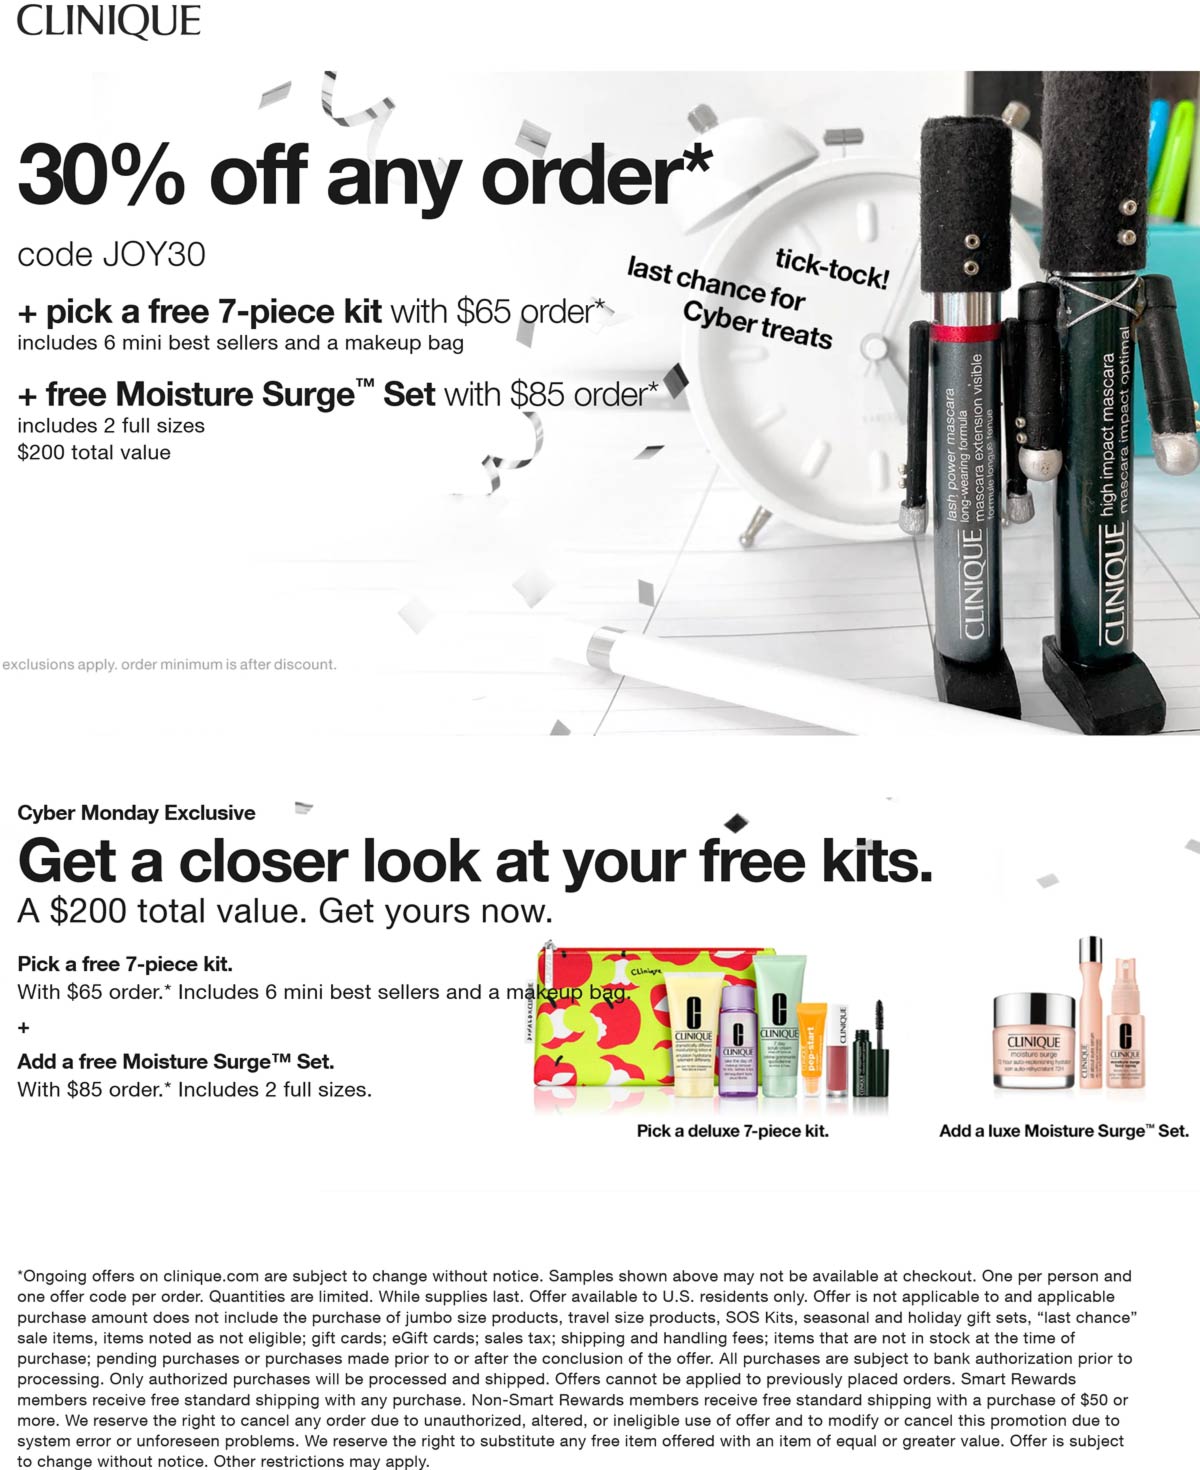 30 off + 200 in free stuff on 65+ spent at Clinique via promo code